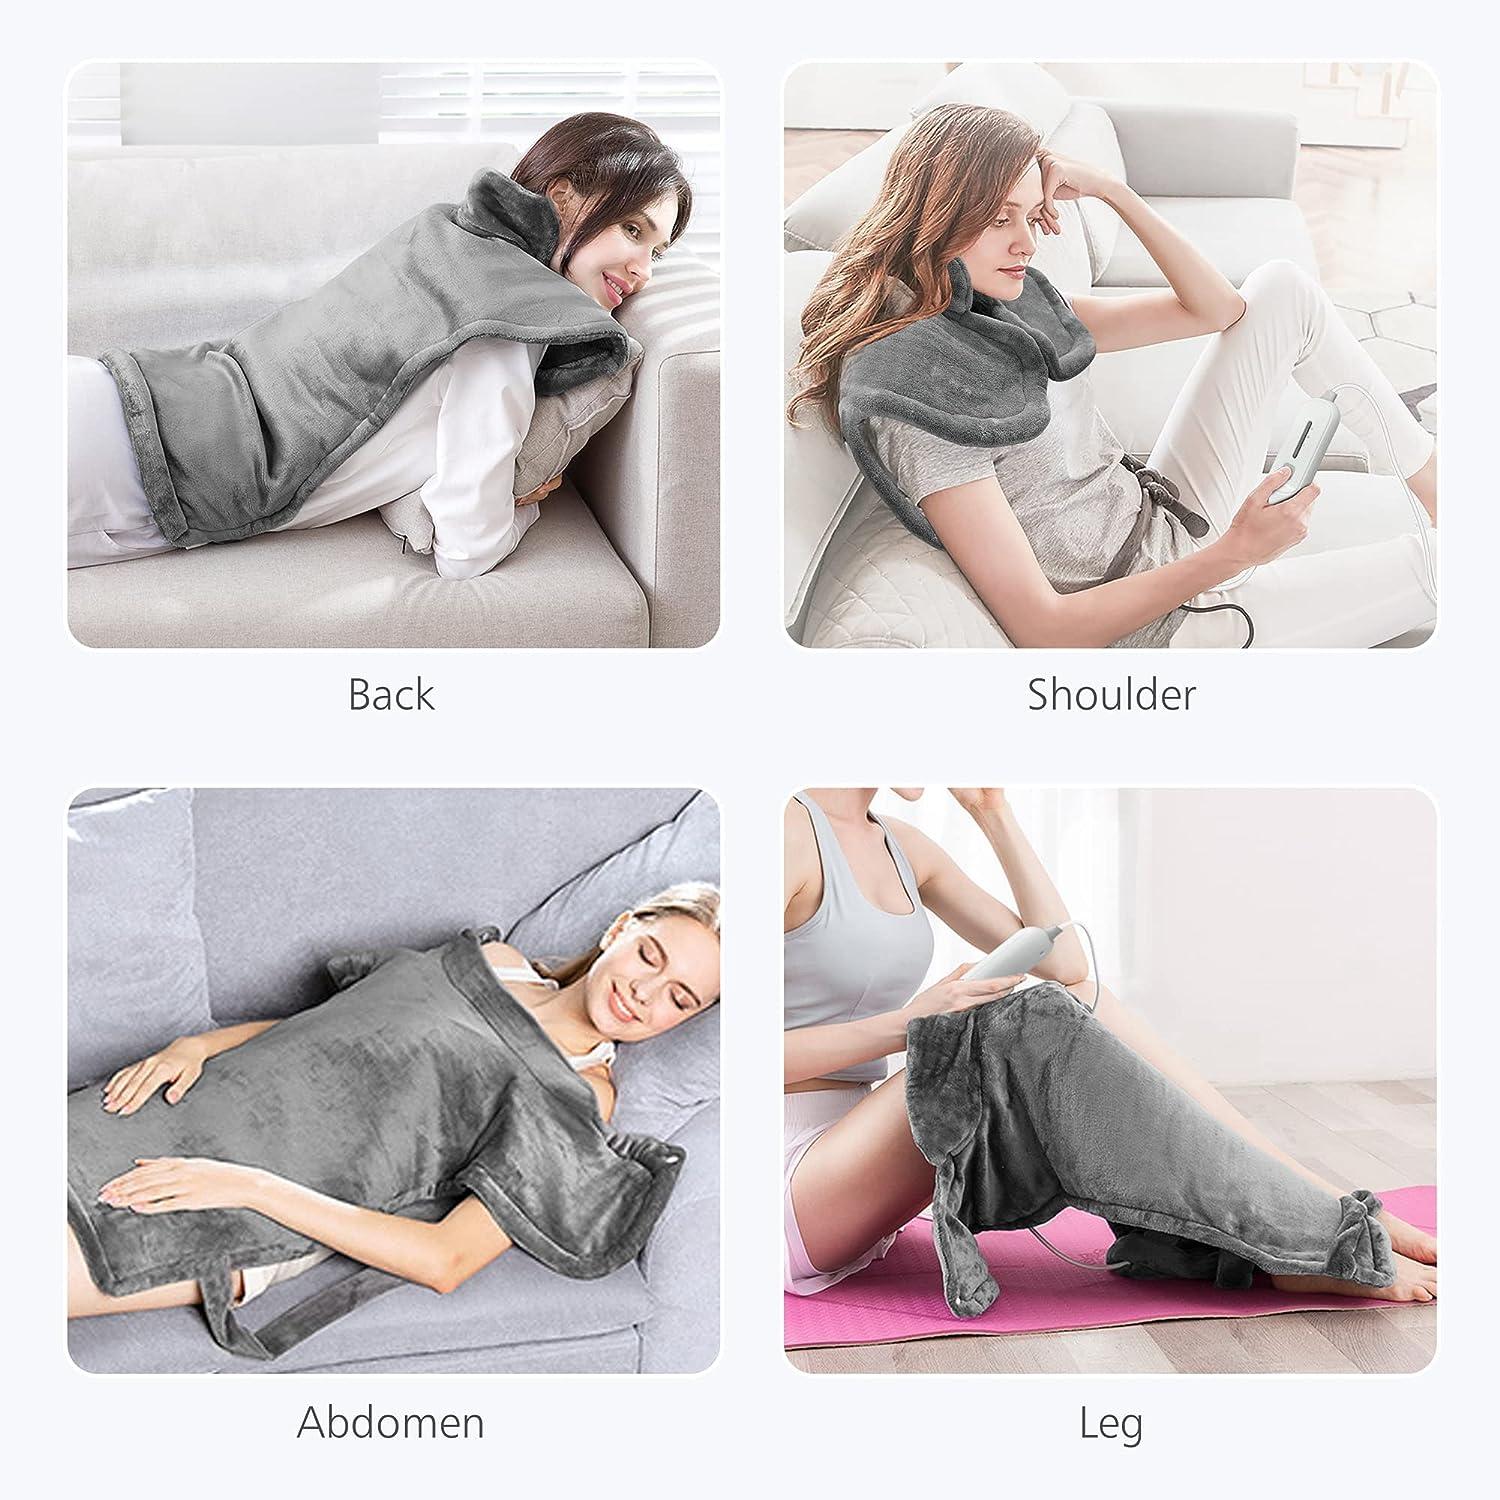  COMFIER Heating Pad for Back Pain - Heat Belly Wrap